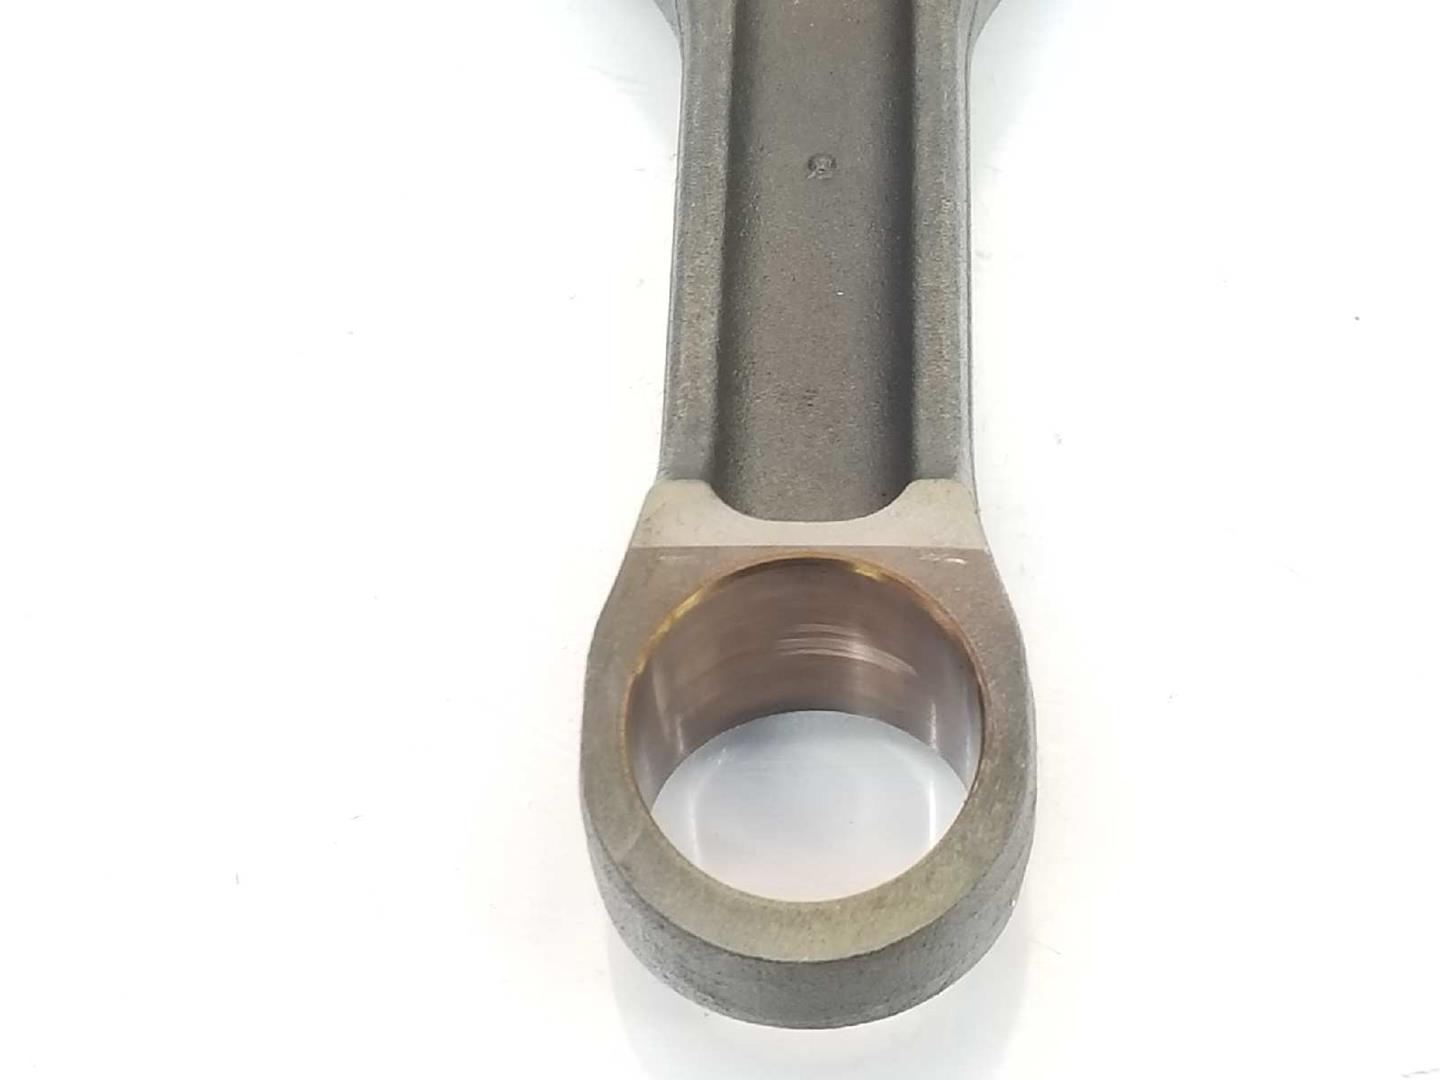 BMW X3 E83 (2003-2010) Connecting Rod 11247798368, 11247798368 19726853